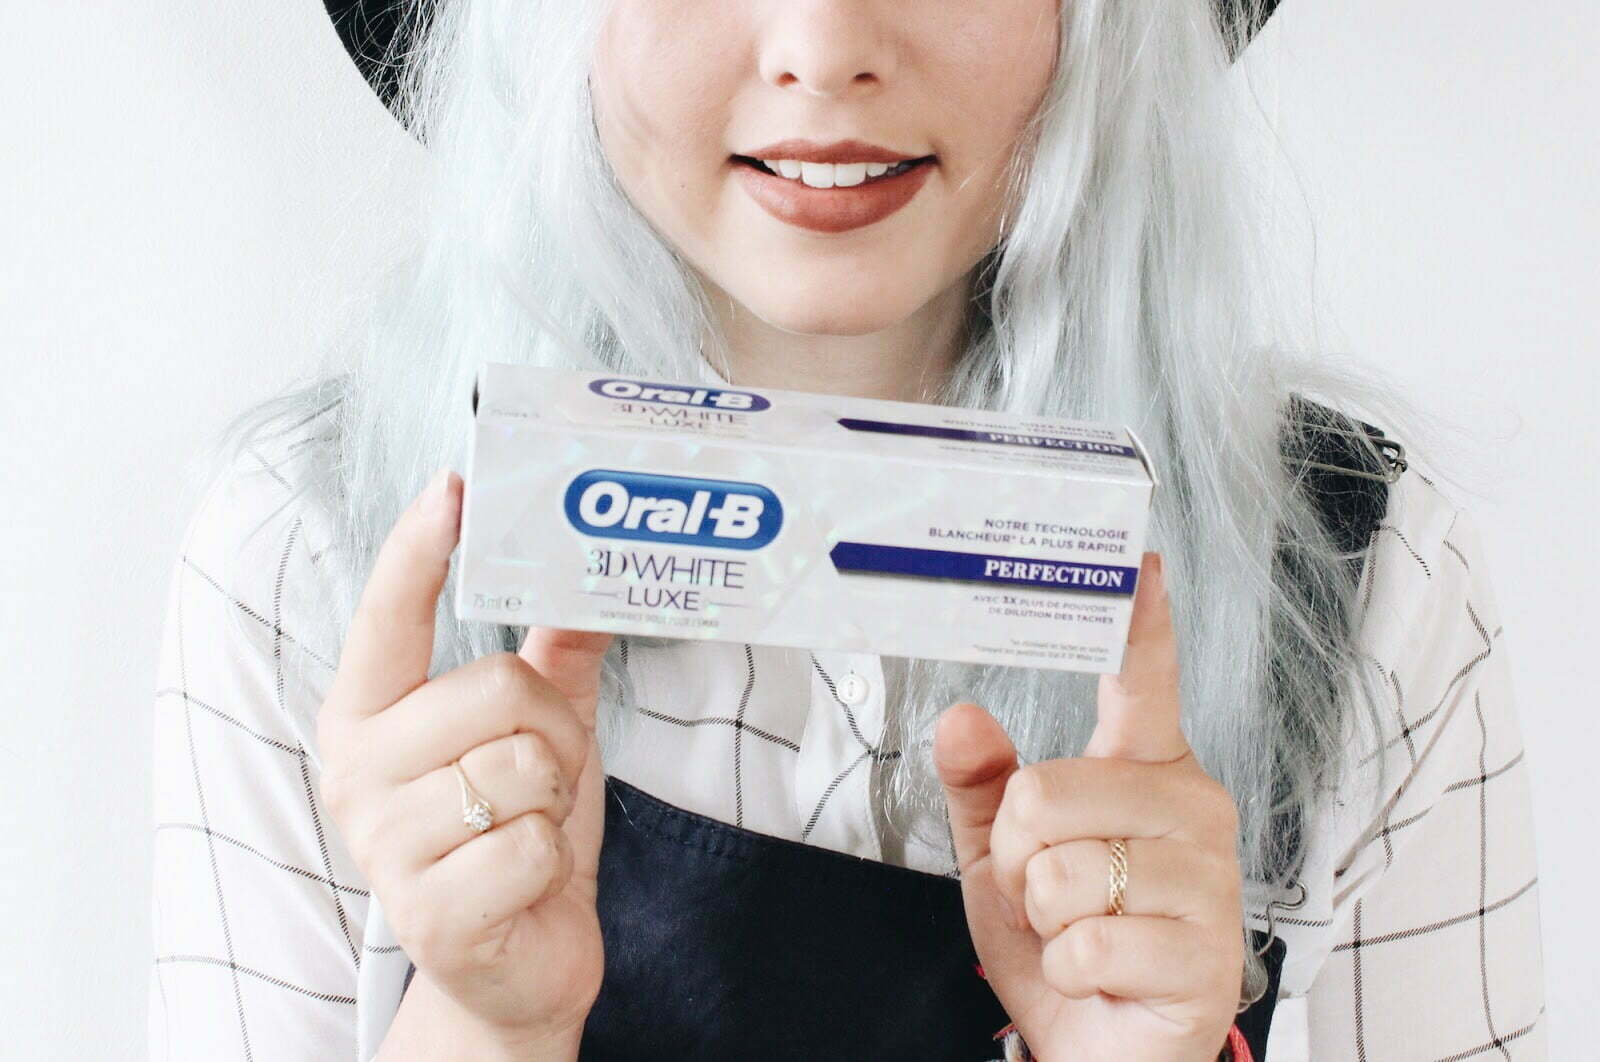 Oral-B 3D white luxe review